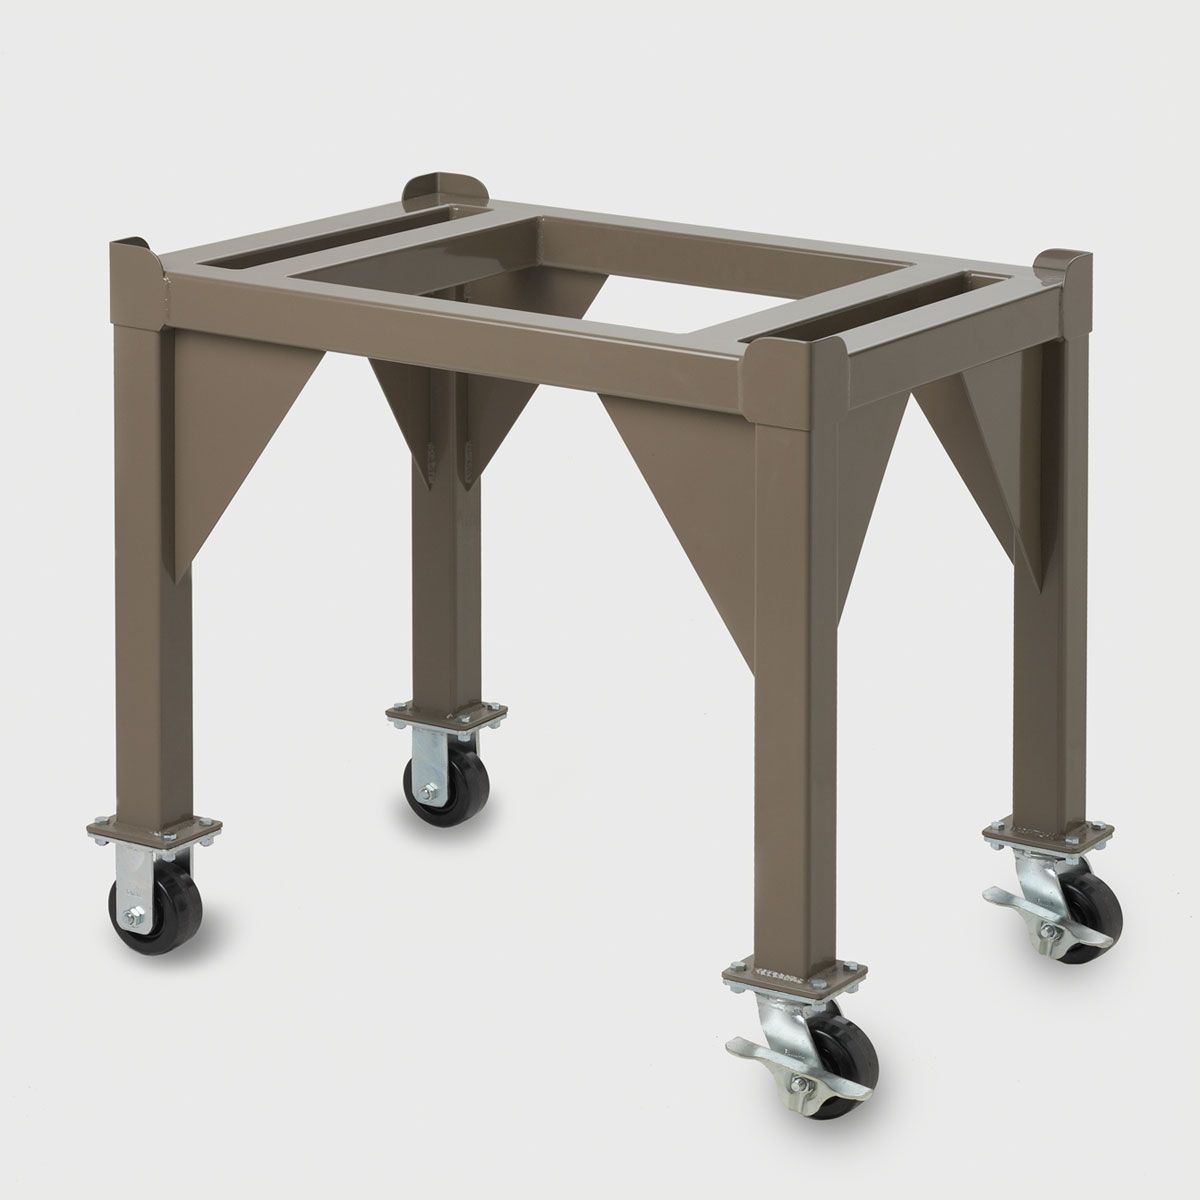 Tan metal stand with large wheel casters